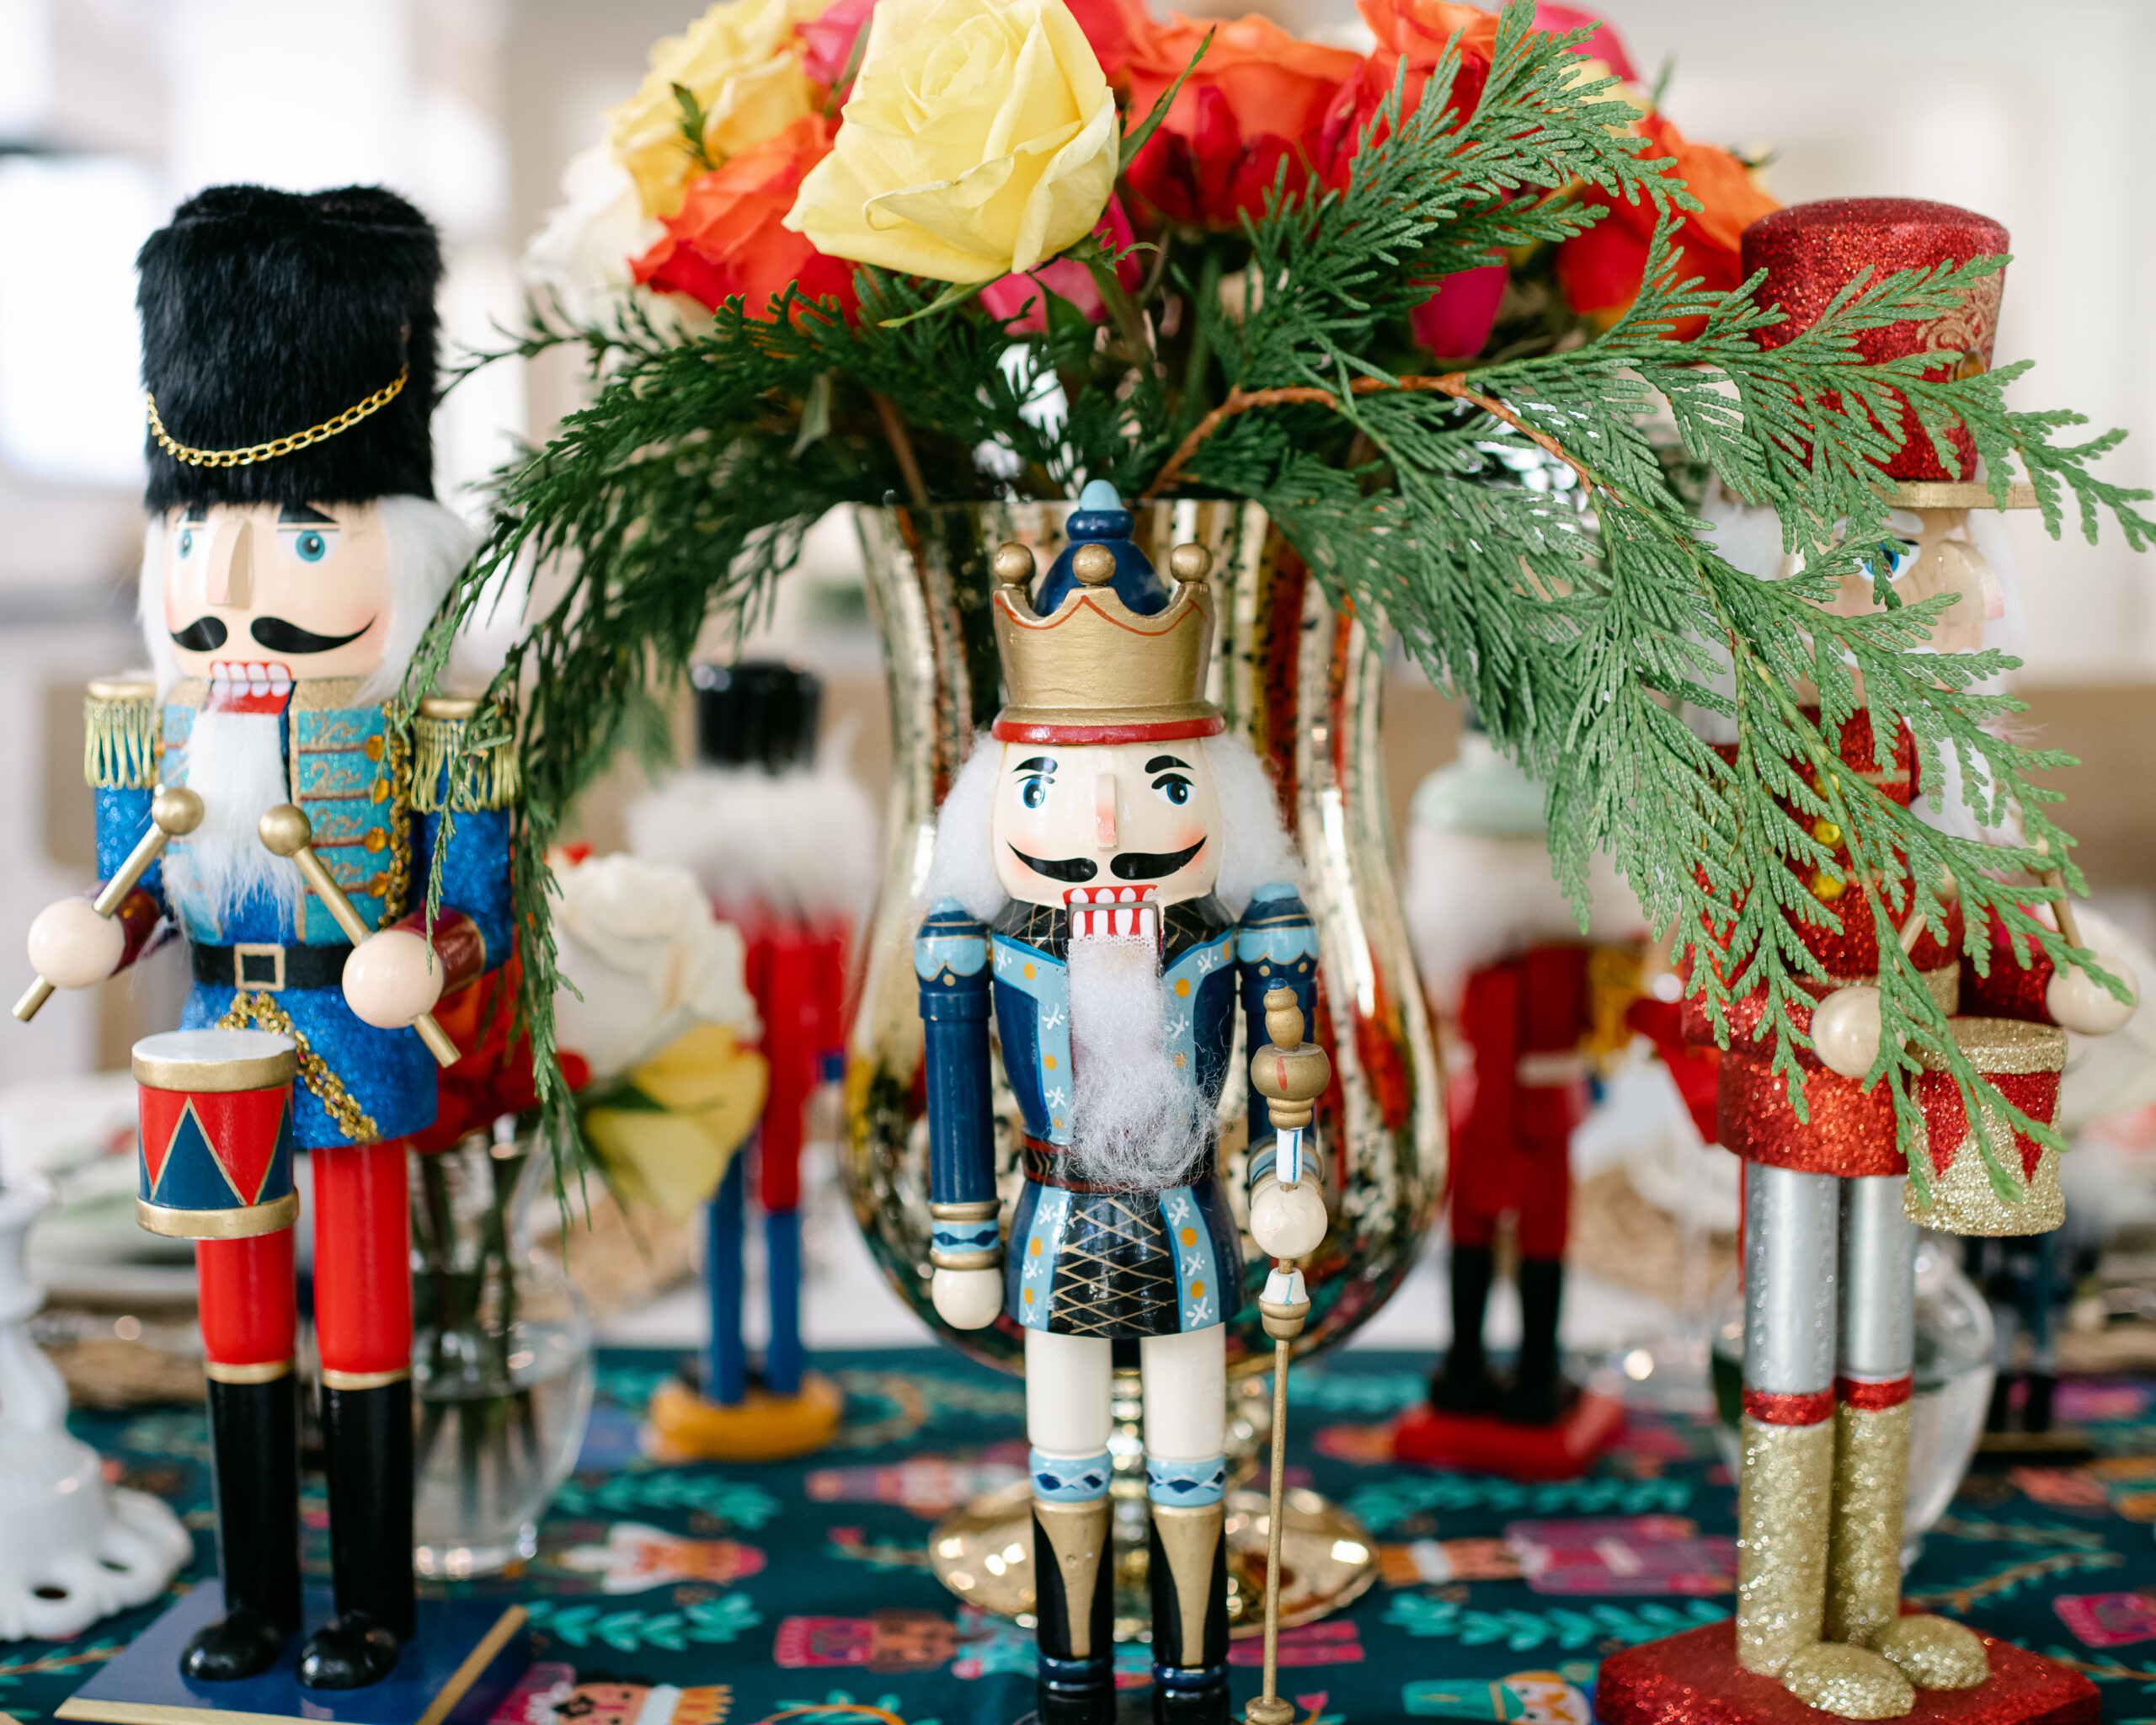 nutcrackers lined the table